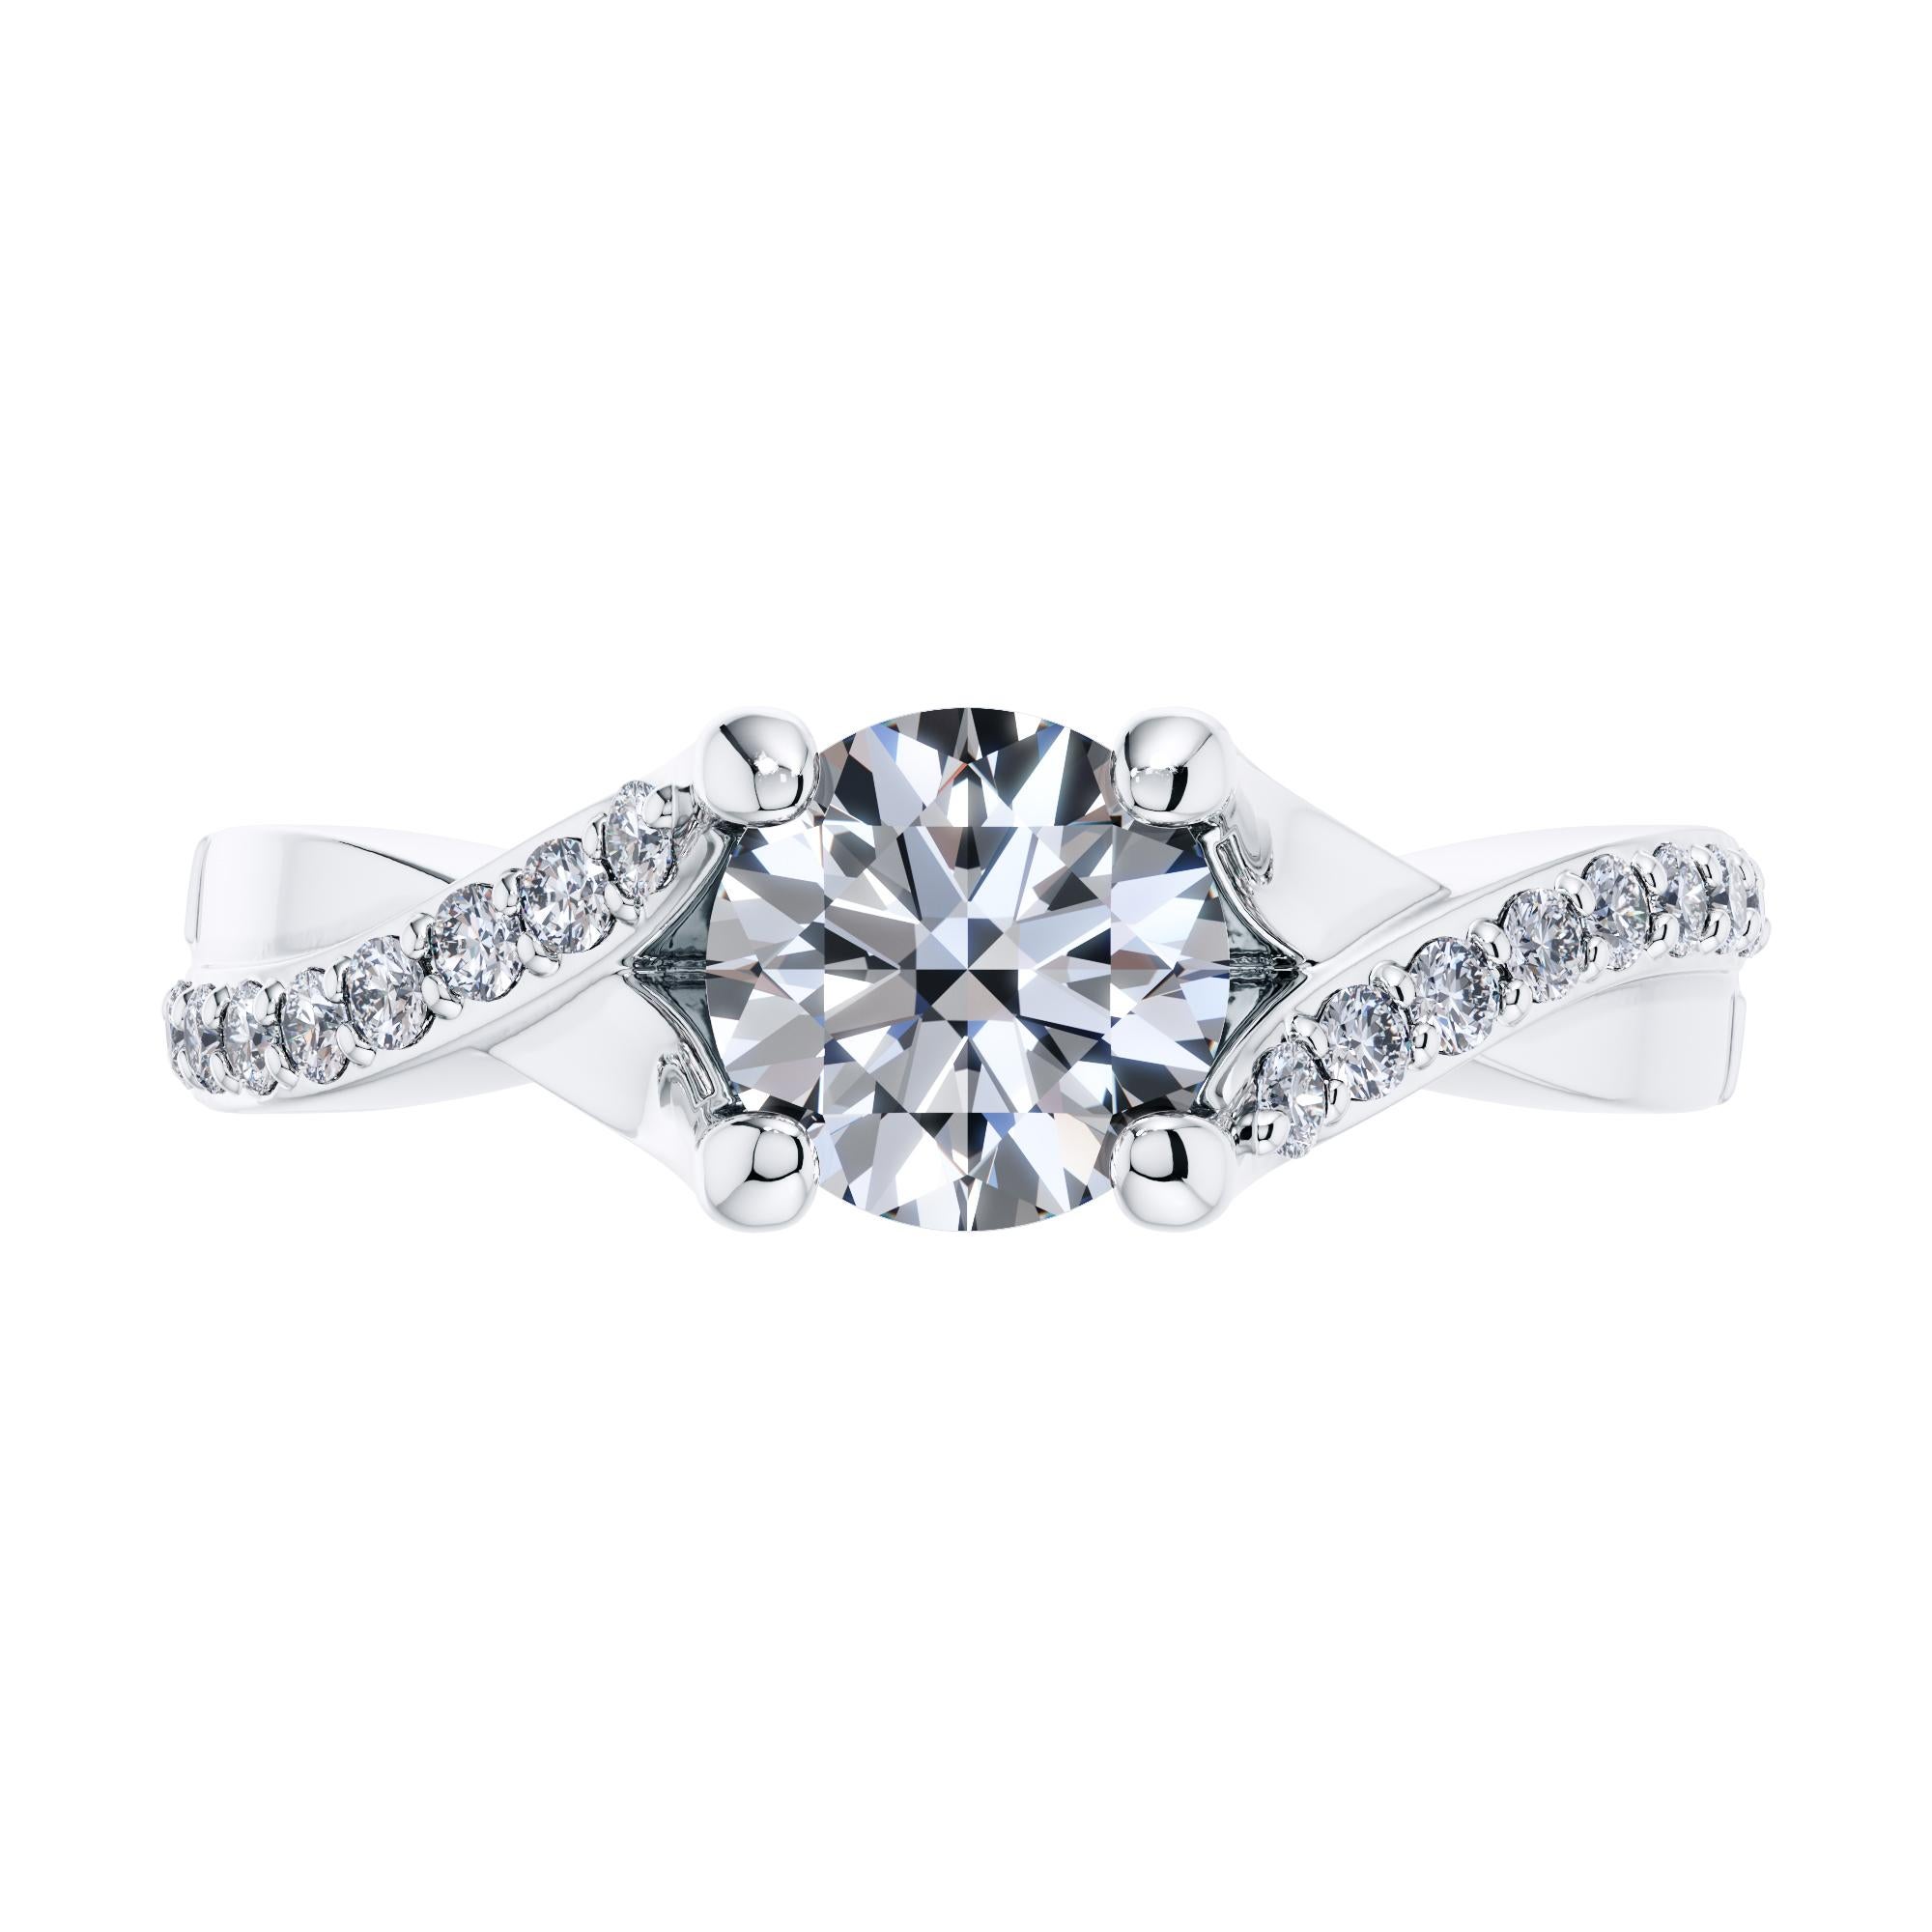 For a beautifully entwined journey together, this gleaming twisted vine modern classic engagement ring. Handmade in 18 Karat White Gold, with a total of 1.20 Carat White Diamond. Set in an open gallery 4 prong mount with a split shank that has one